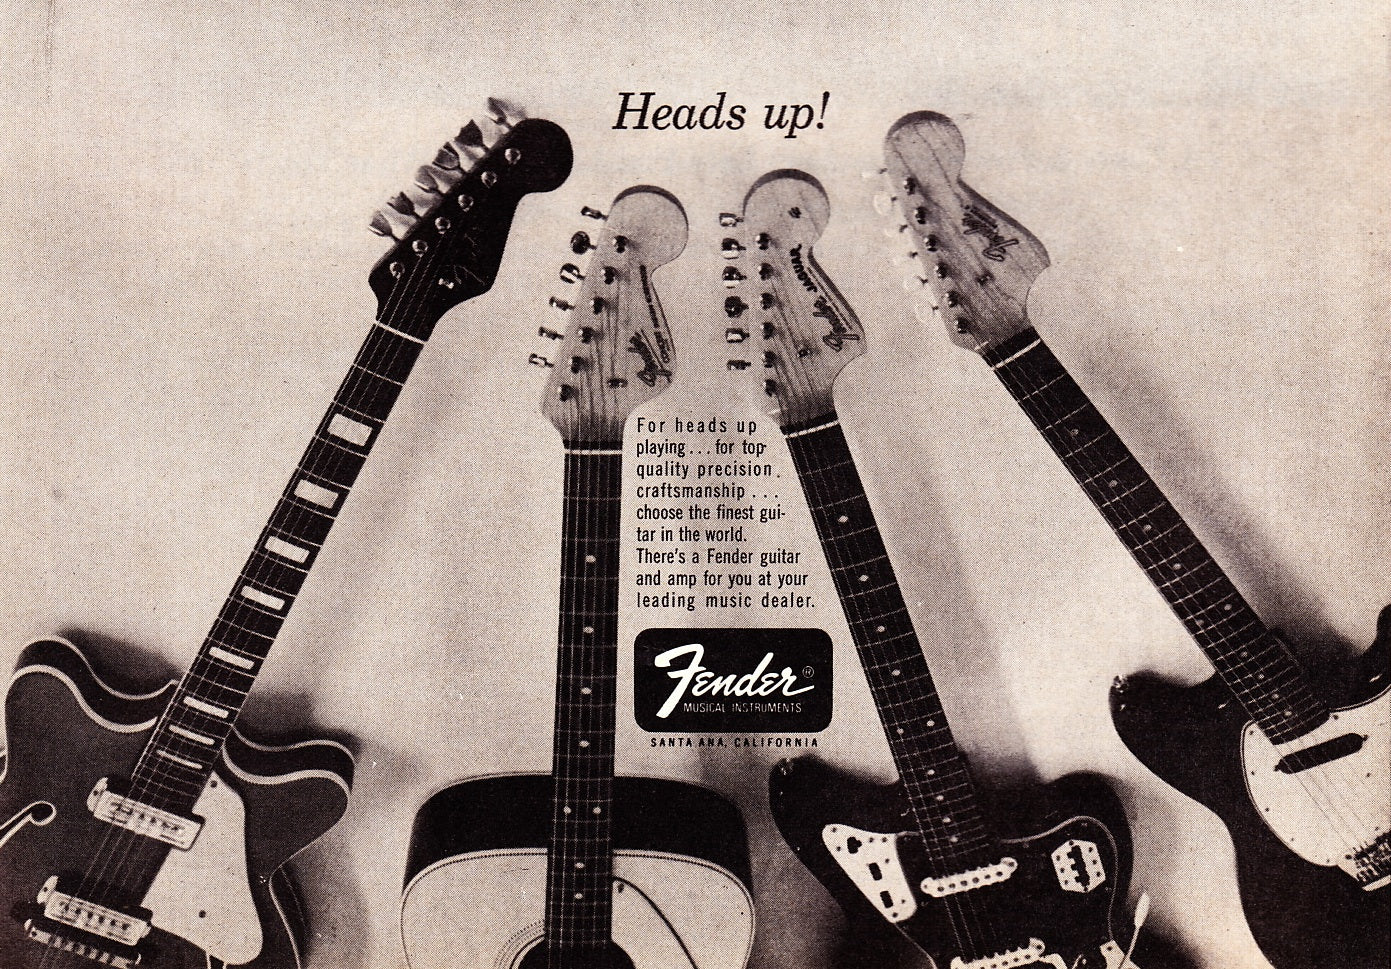 Fender heads up ad